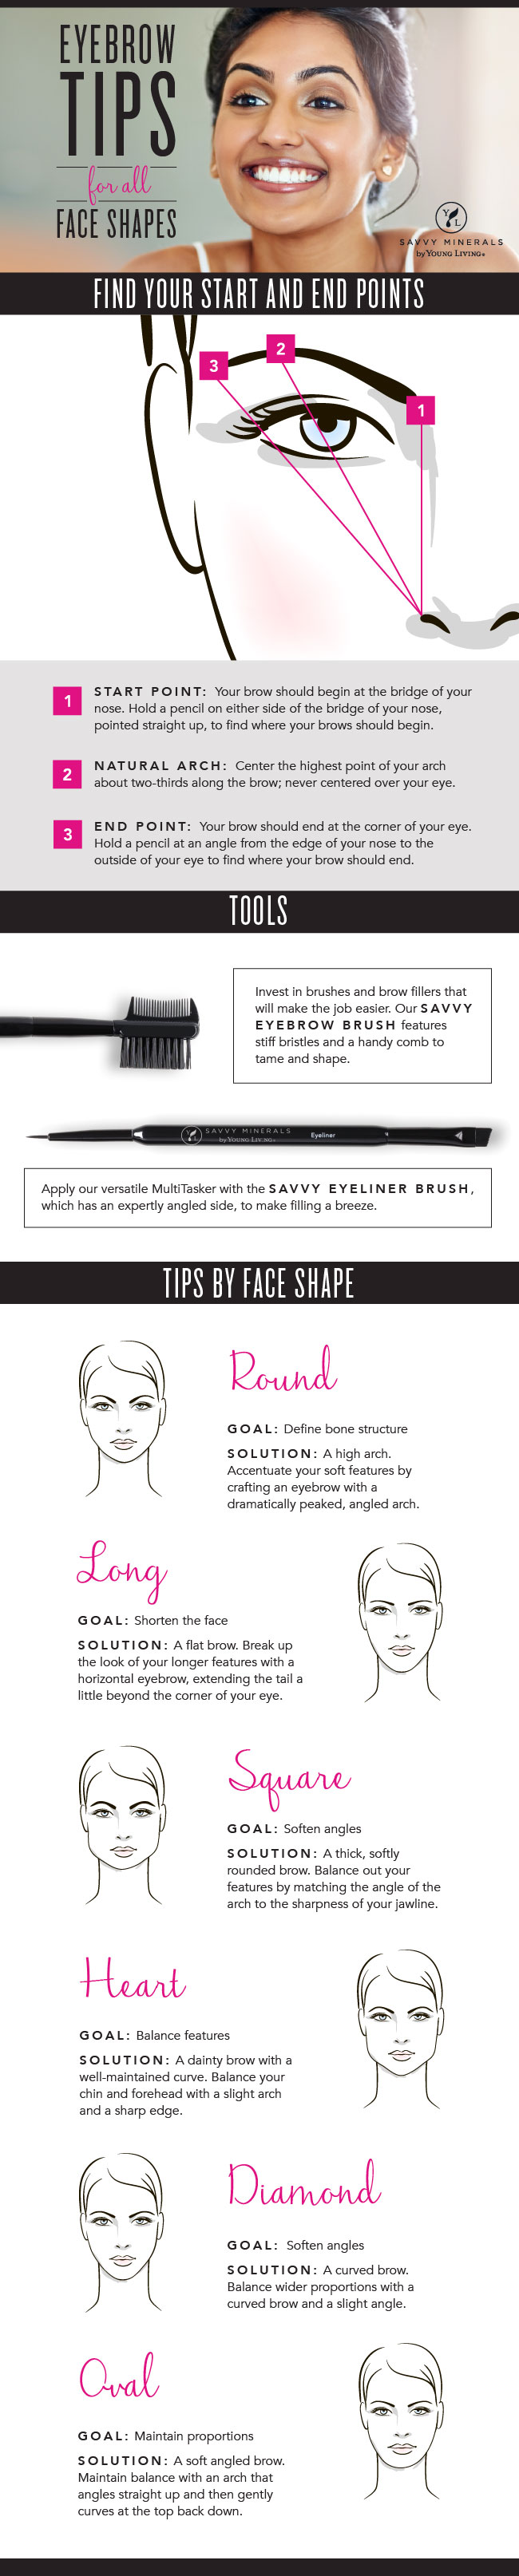 How To Get The Perfect Eyebrows For Your Face Shape Infographic